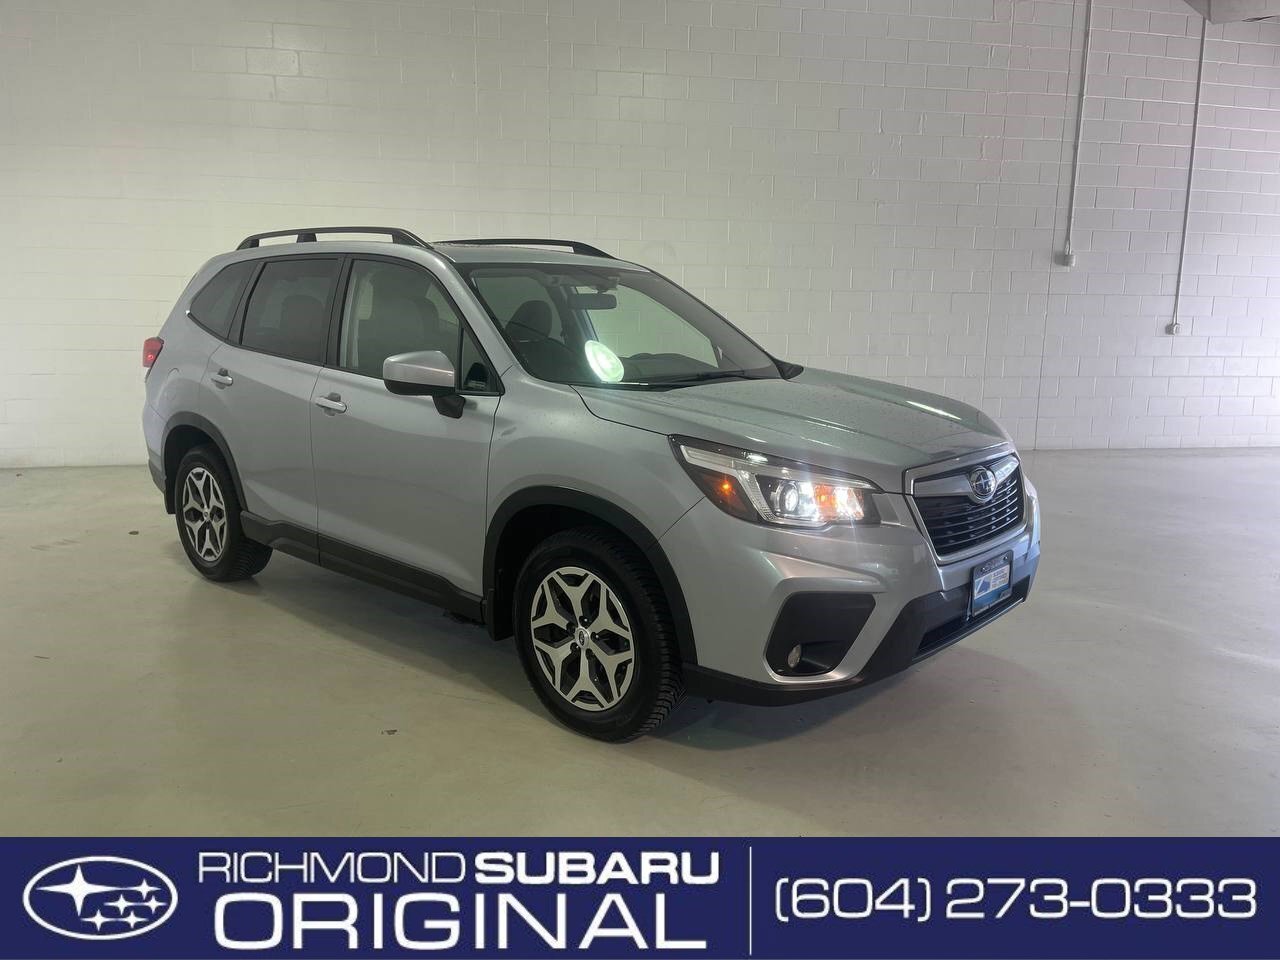 2020 Subaru Forester TOURING | EYESIGHT | CALL TO RESERVE